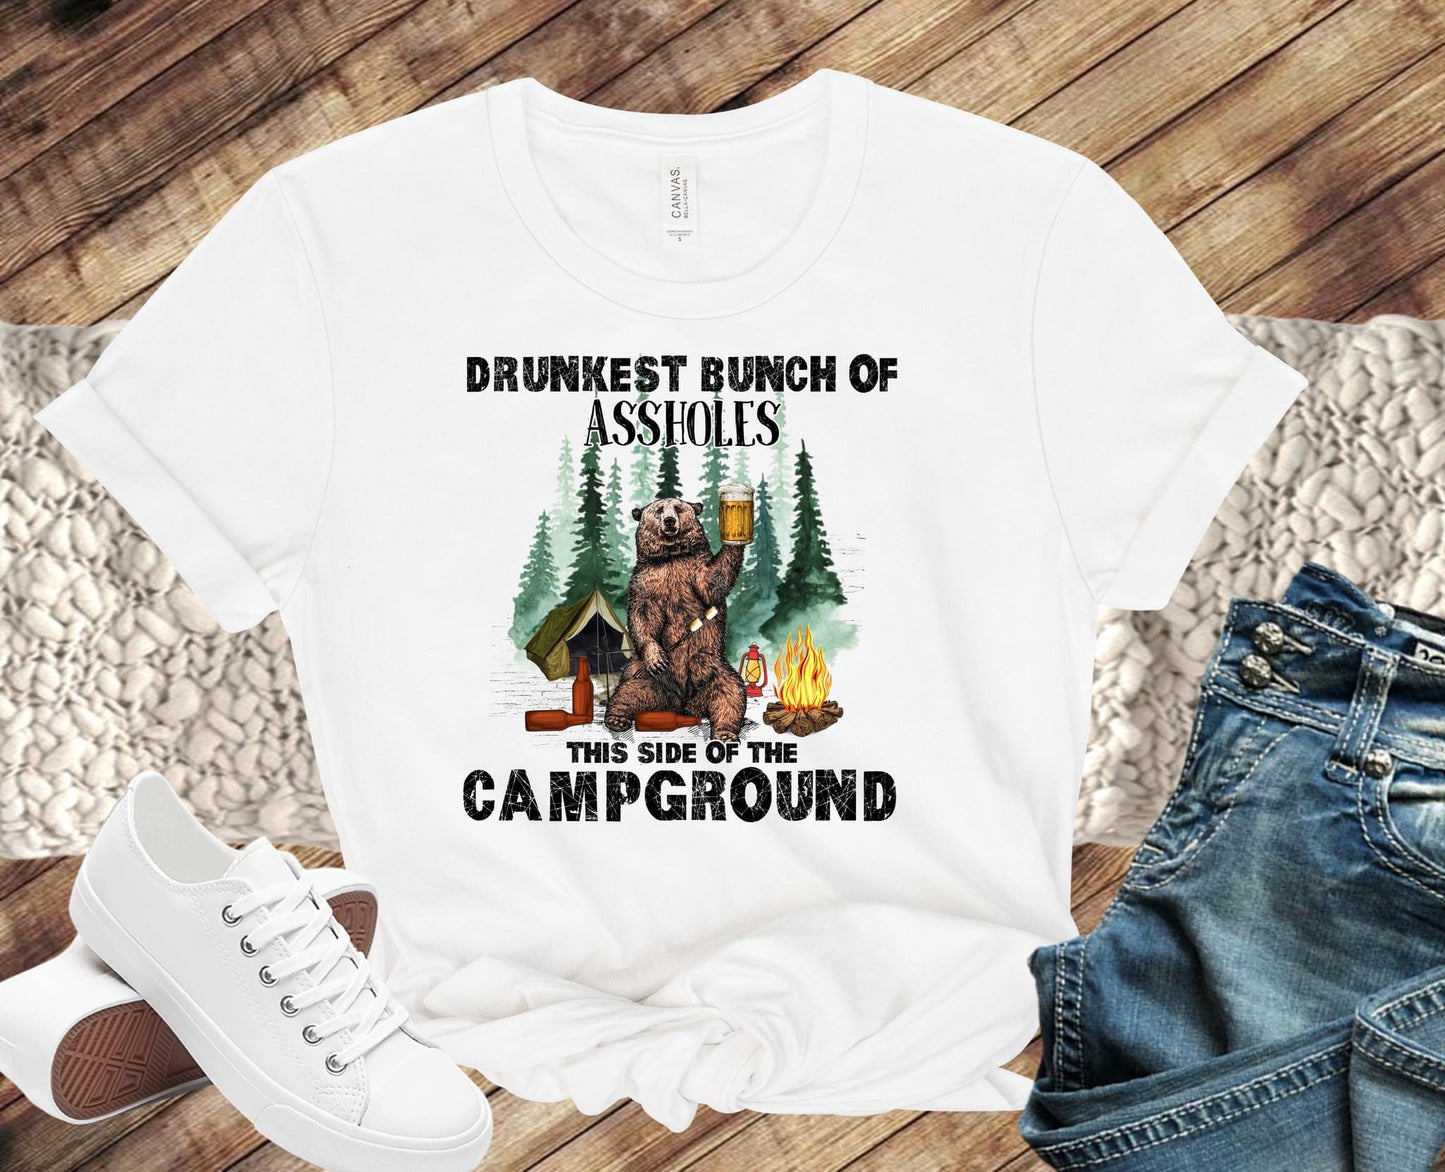 Bear - Drunkest Bunch of Assholes this side of the Campground